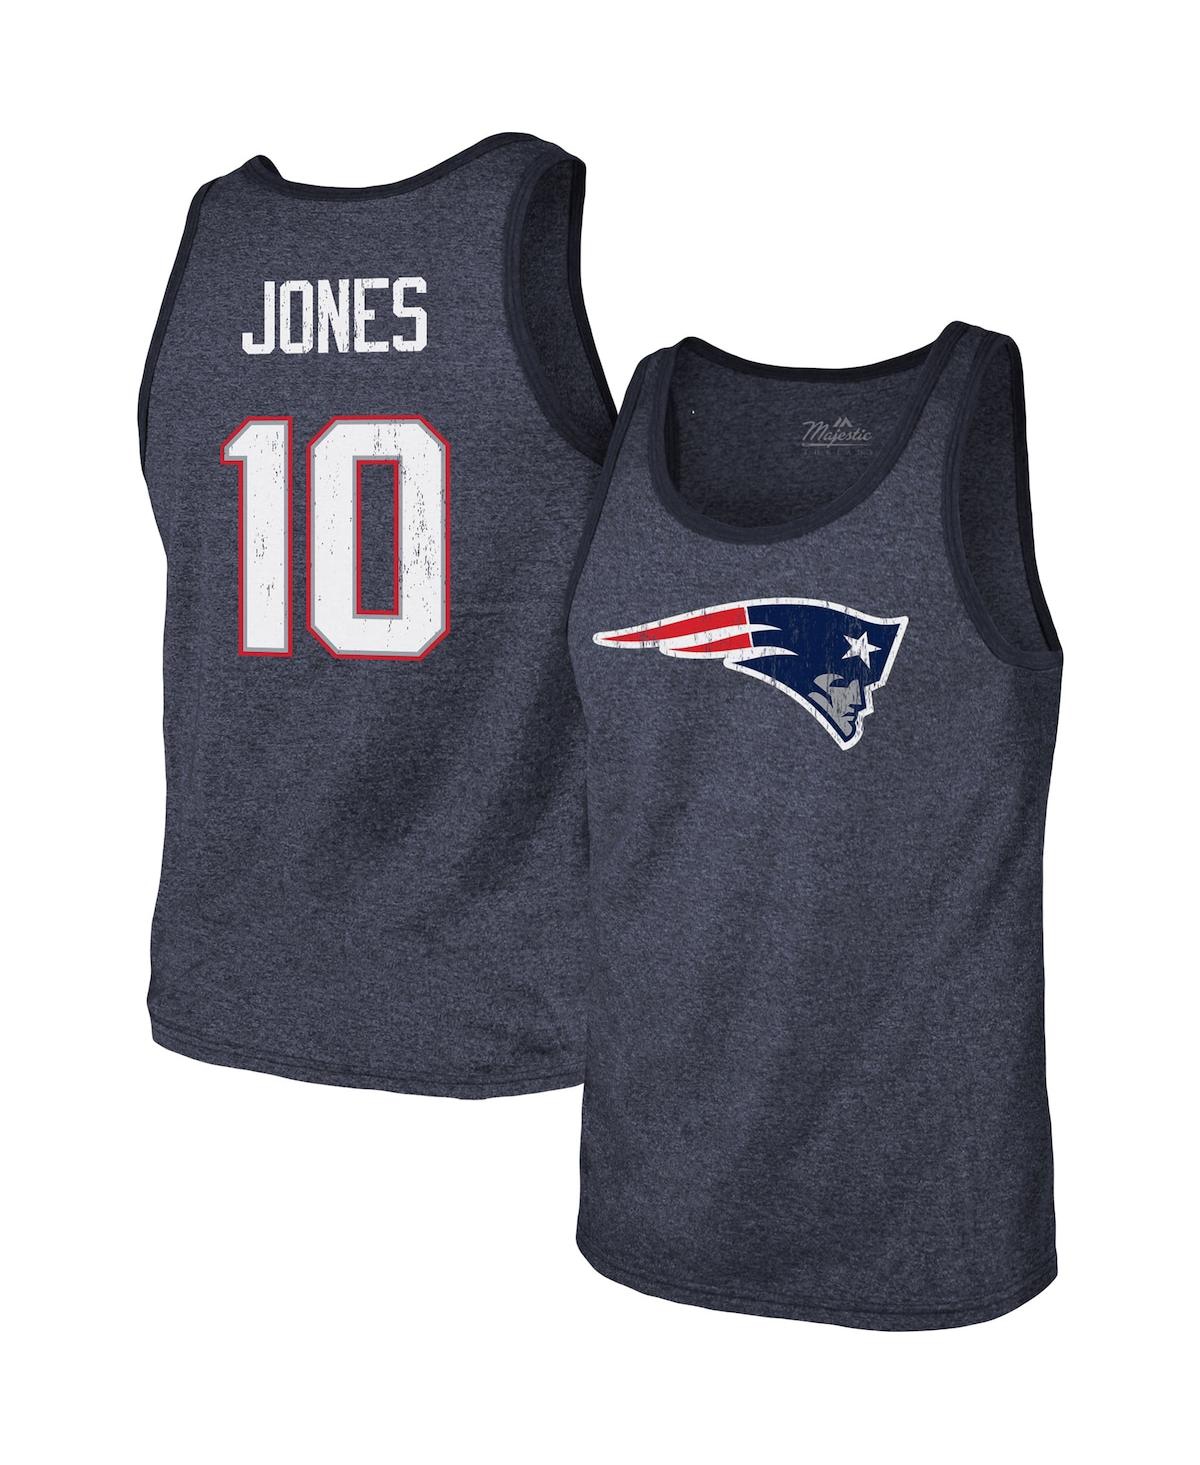 Men's Majestic Threads Mac Jones Heathered Navy New England Patriots Player Name and Number Tri-Blend Tank Top - Heathered Navy